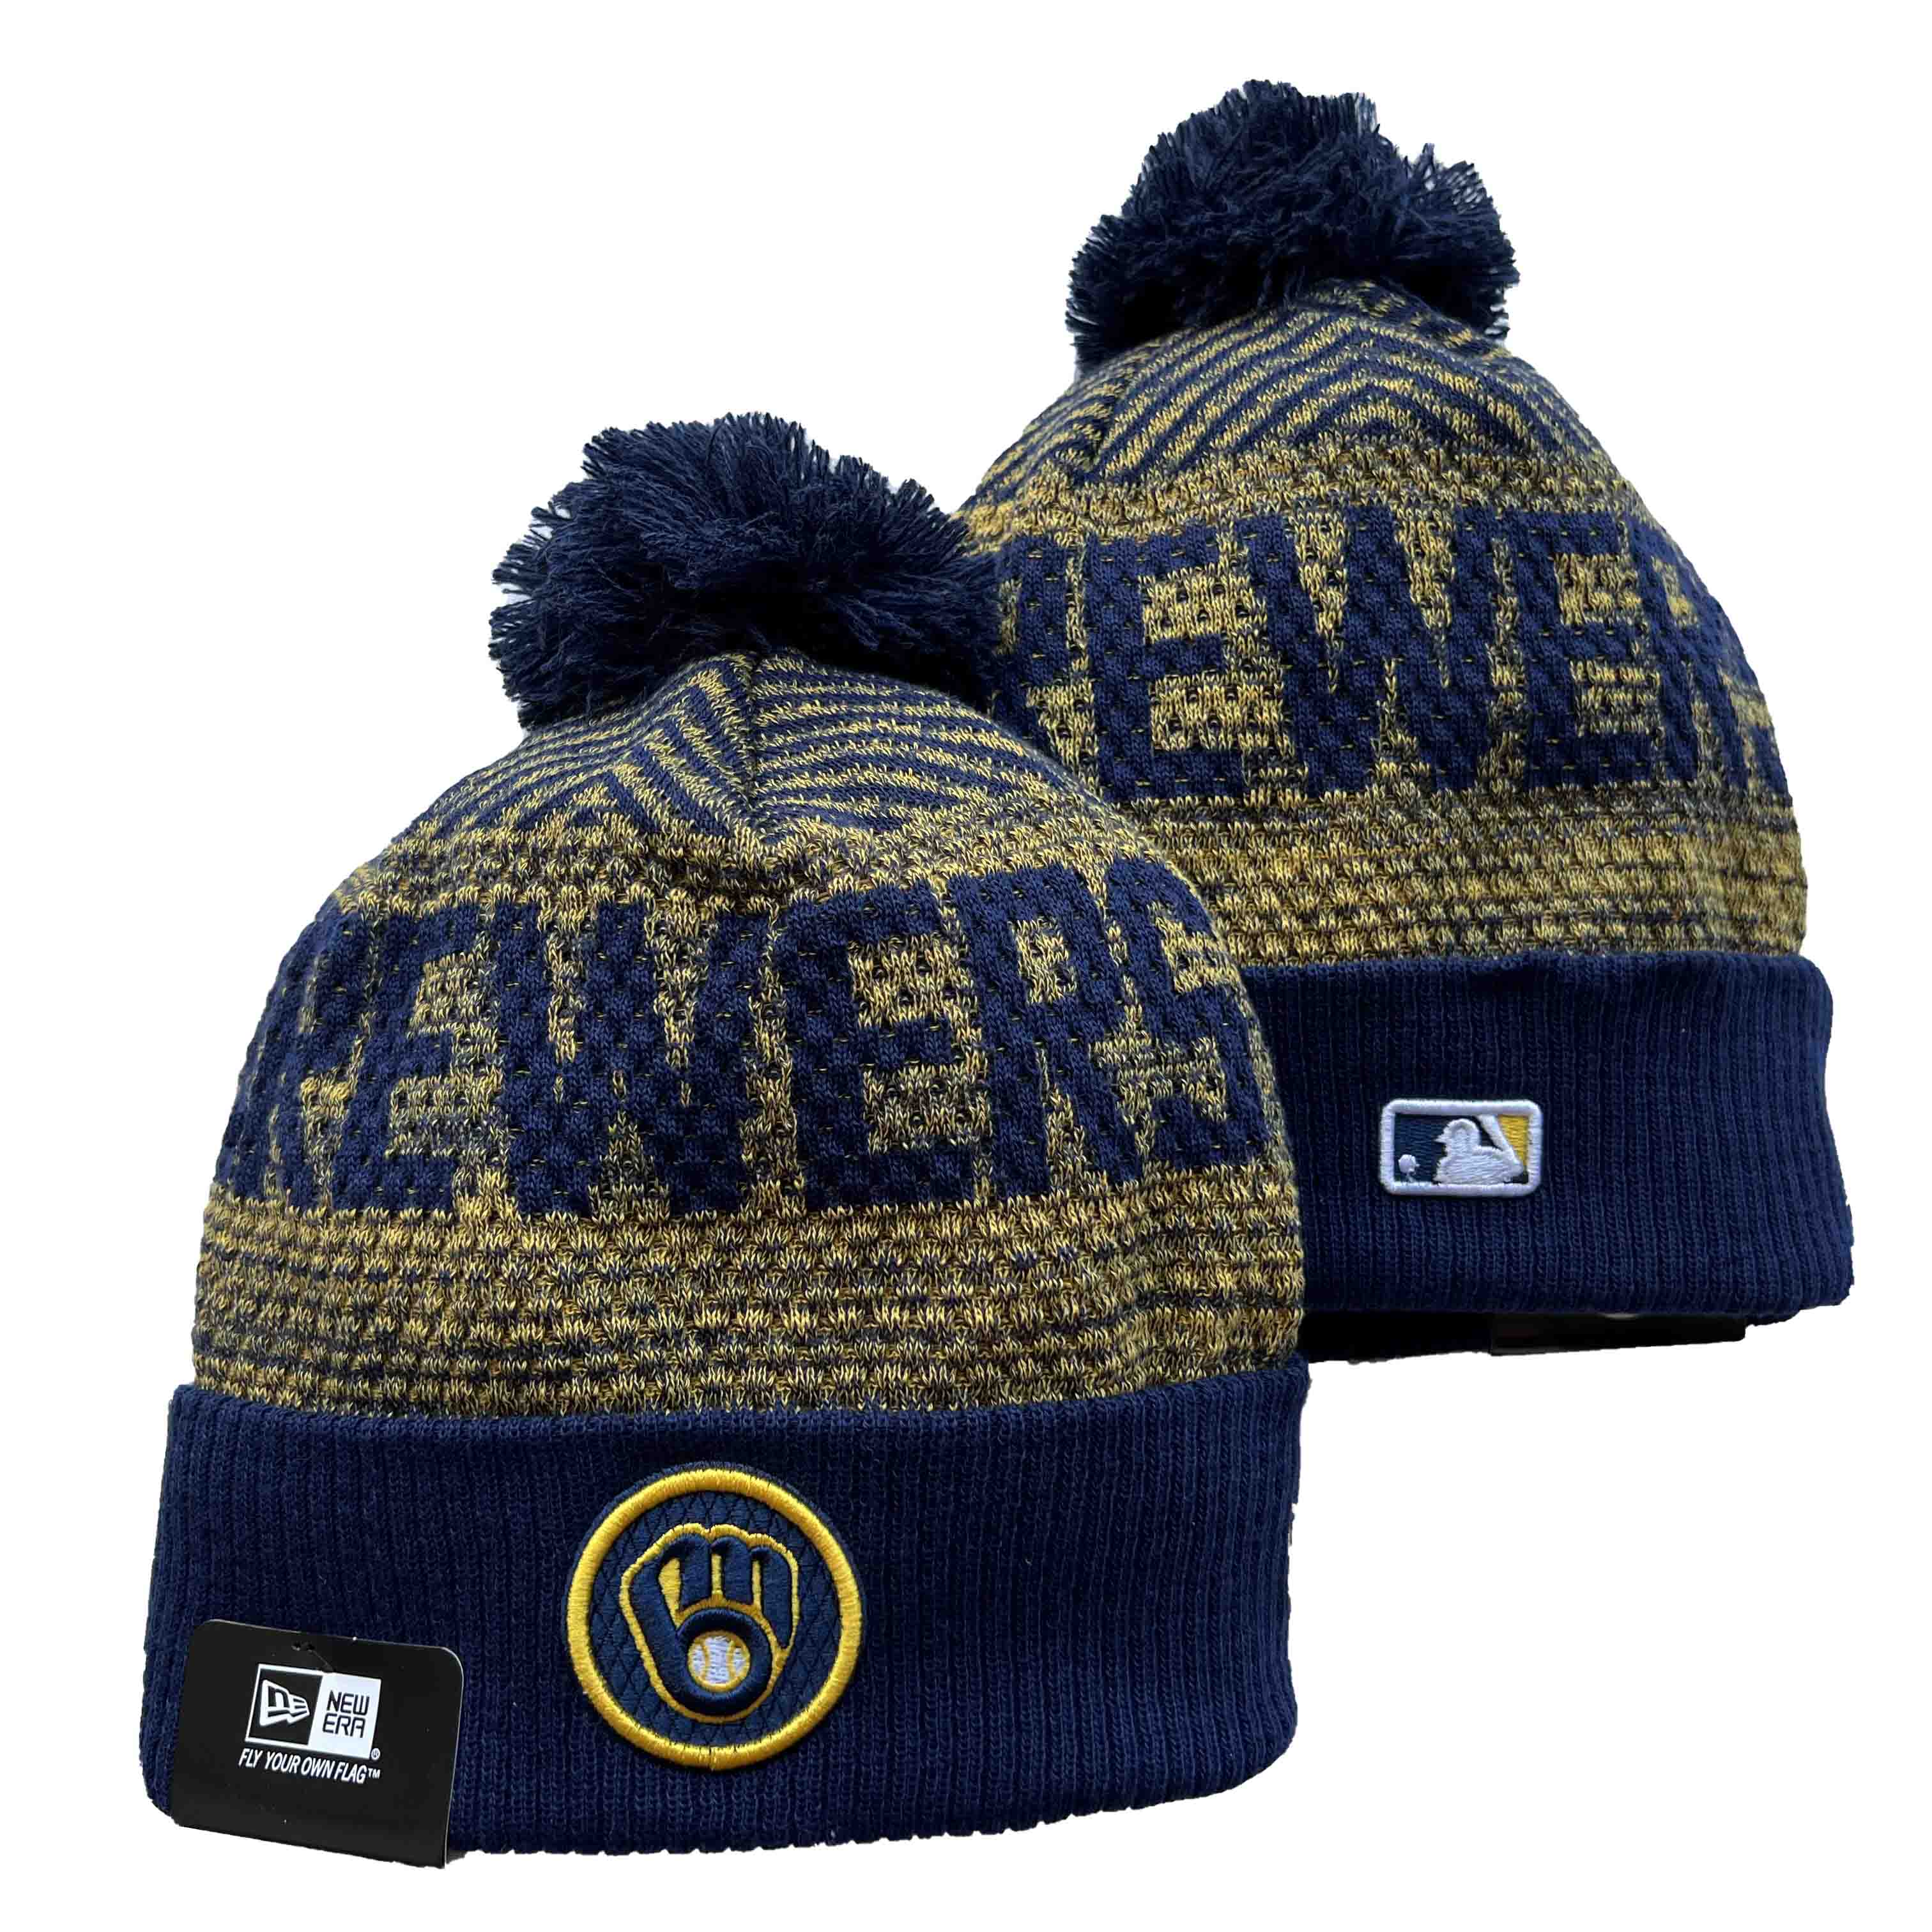 MLB Milwaukee Brewers Beanies Knit Hats-YD178